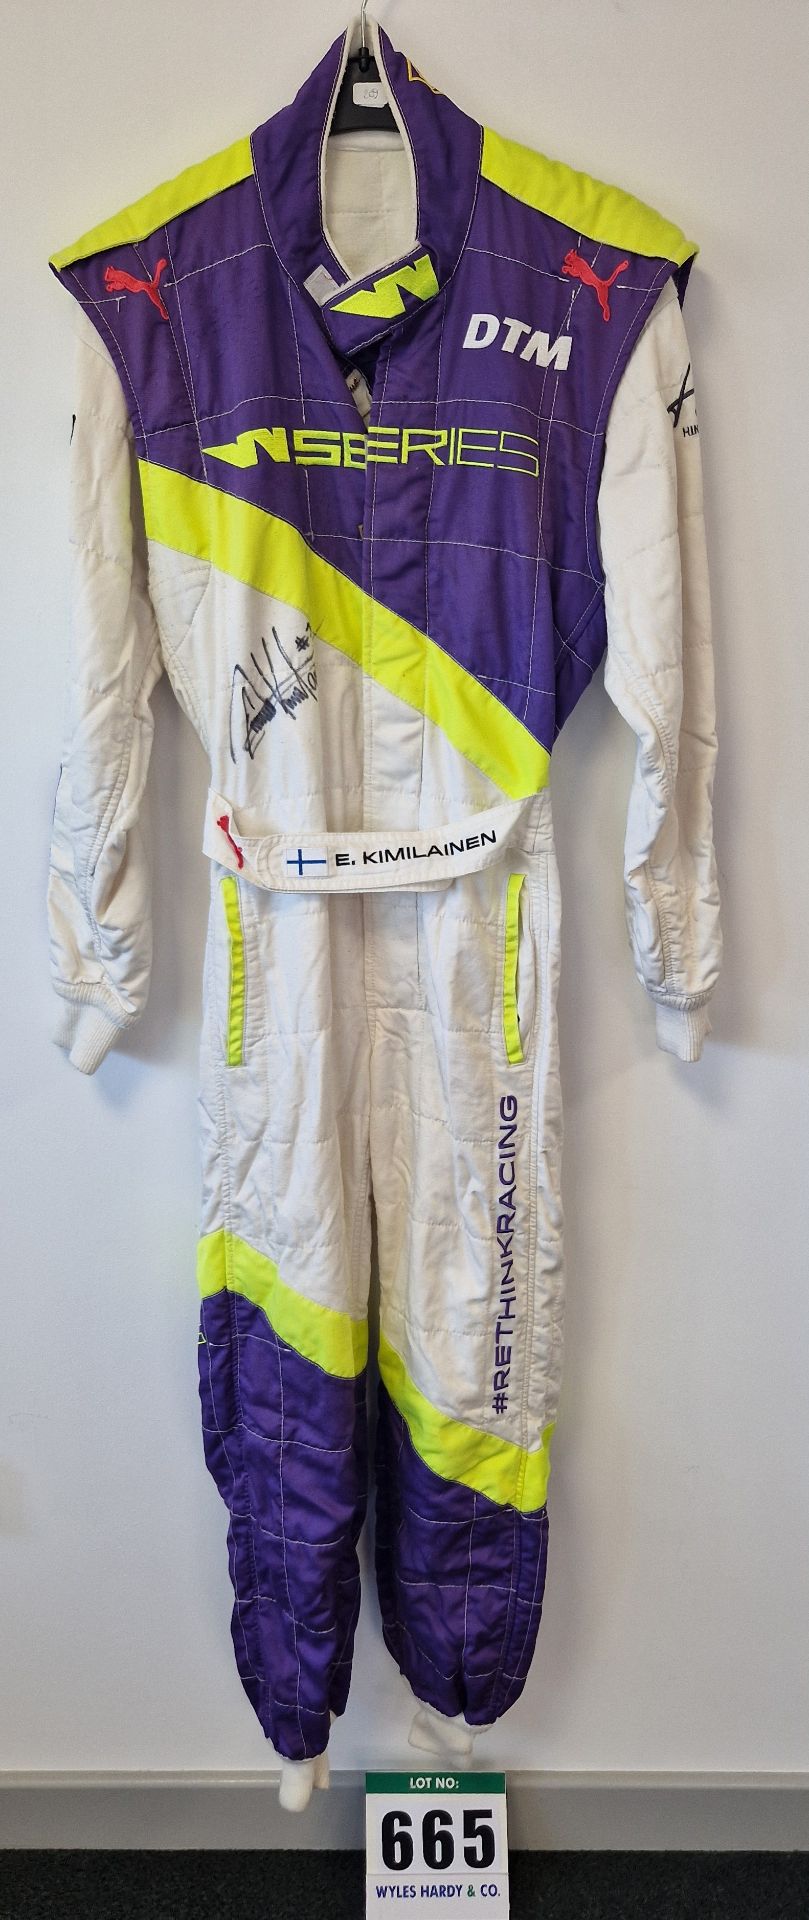 One PUMA FIA approved Race Suit (Size 48) worn by Emma Kimilainen and signed by her with a Kit Bag